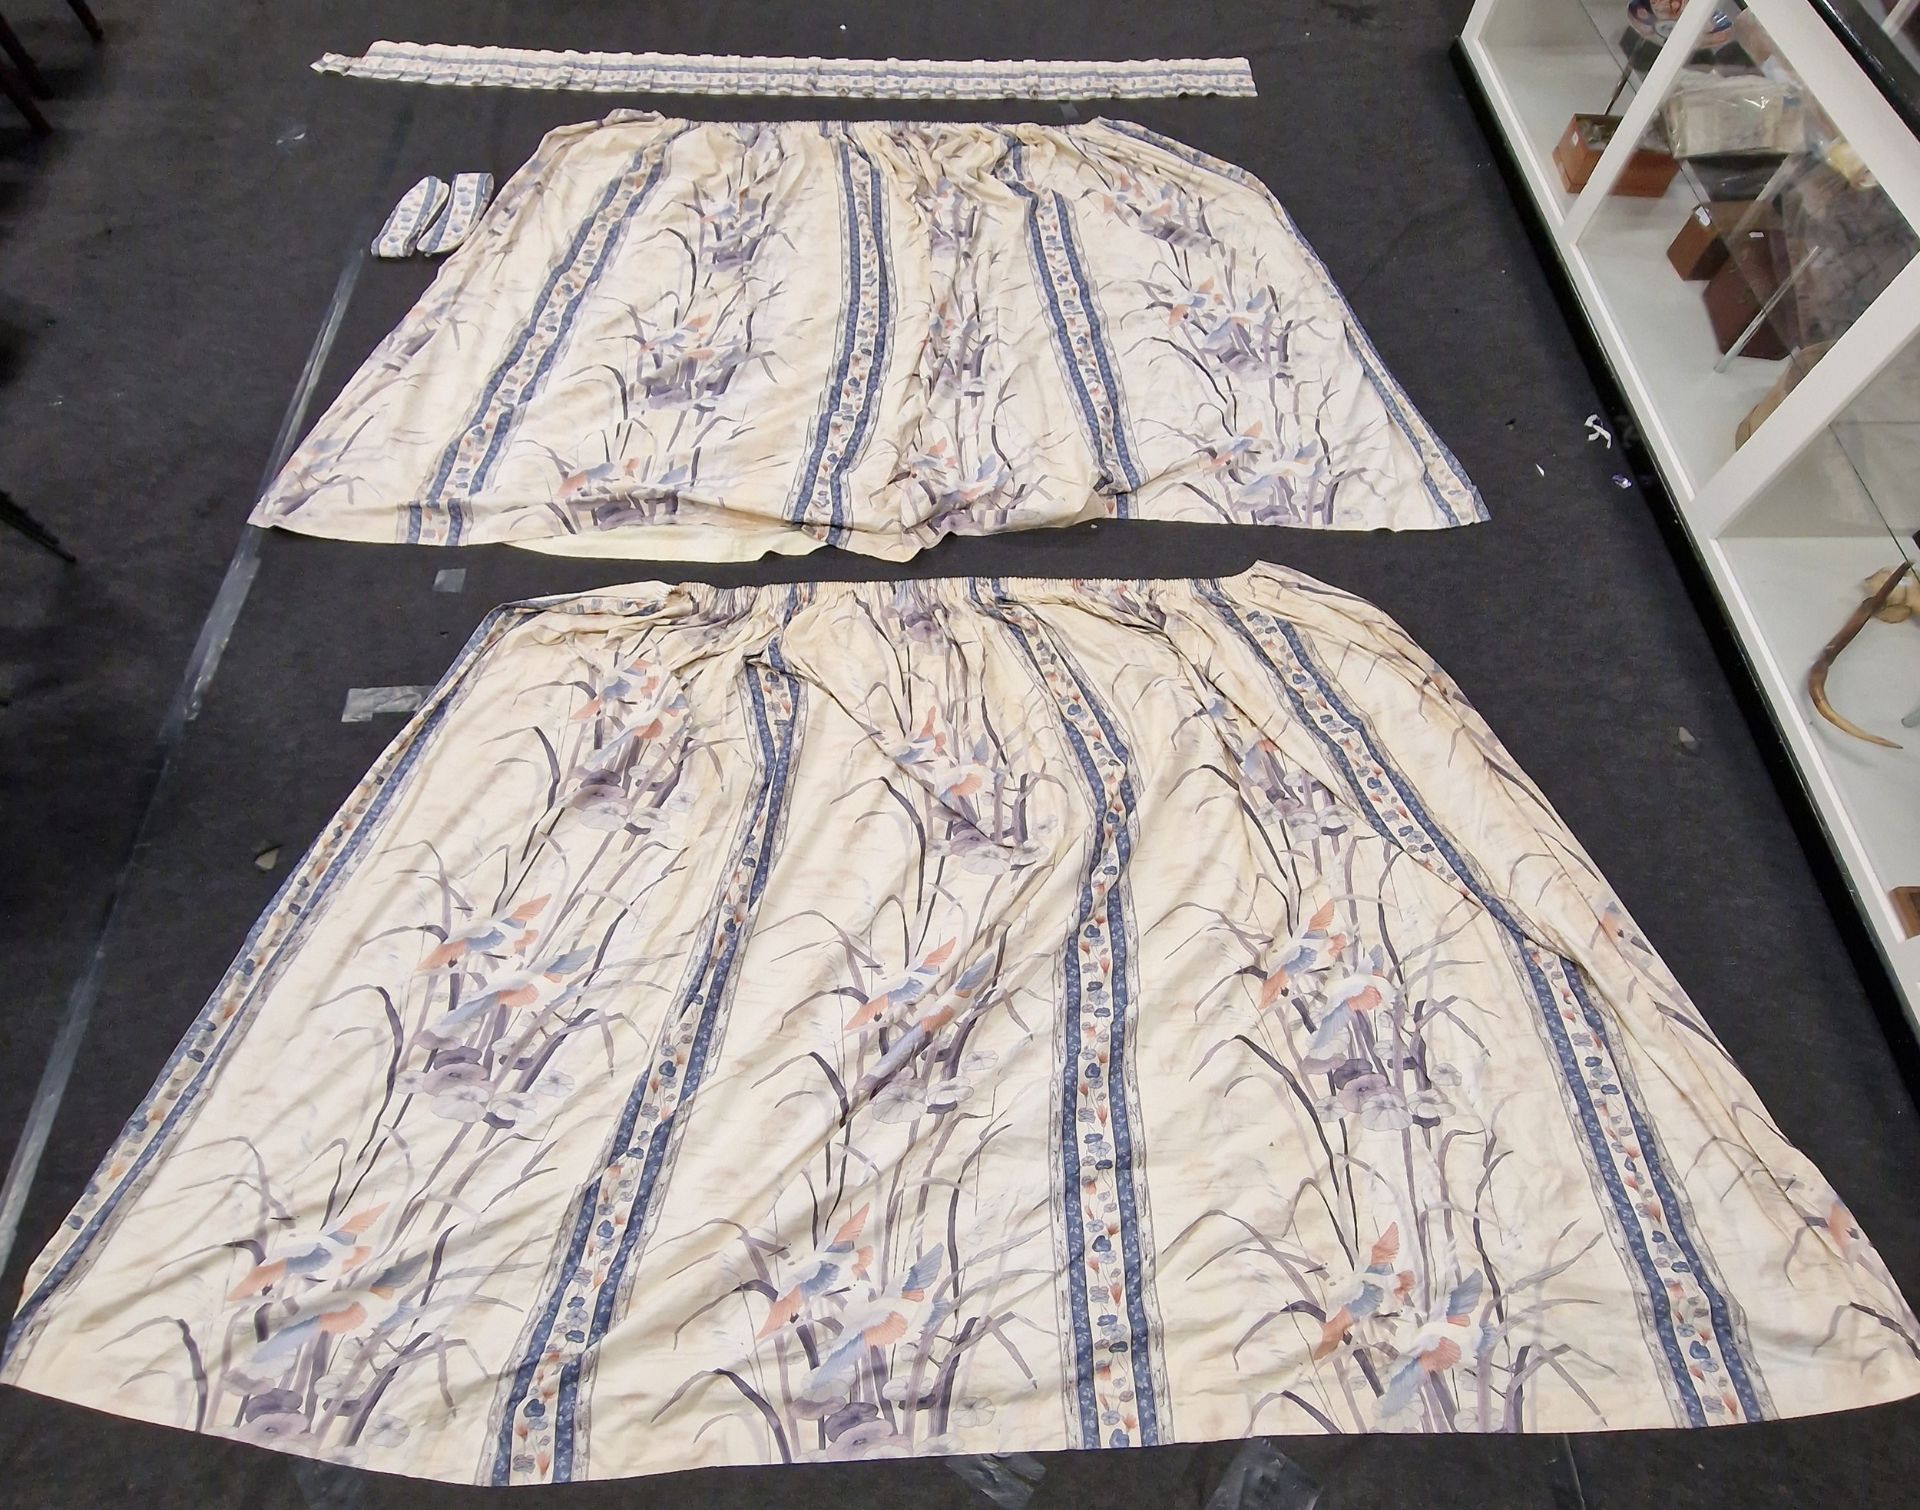 A pair of vintage patterned curtains complete with tie backs and pelmet. Each measures approx